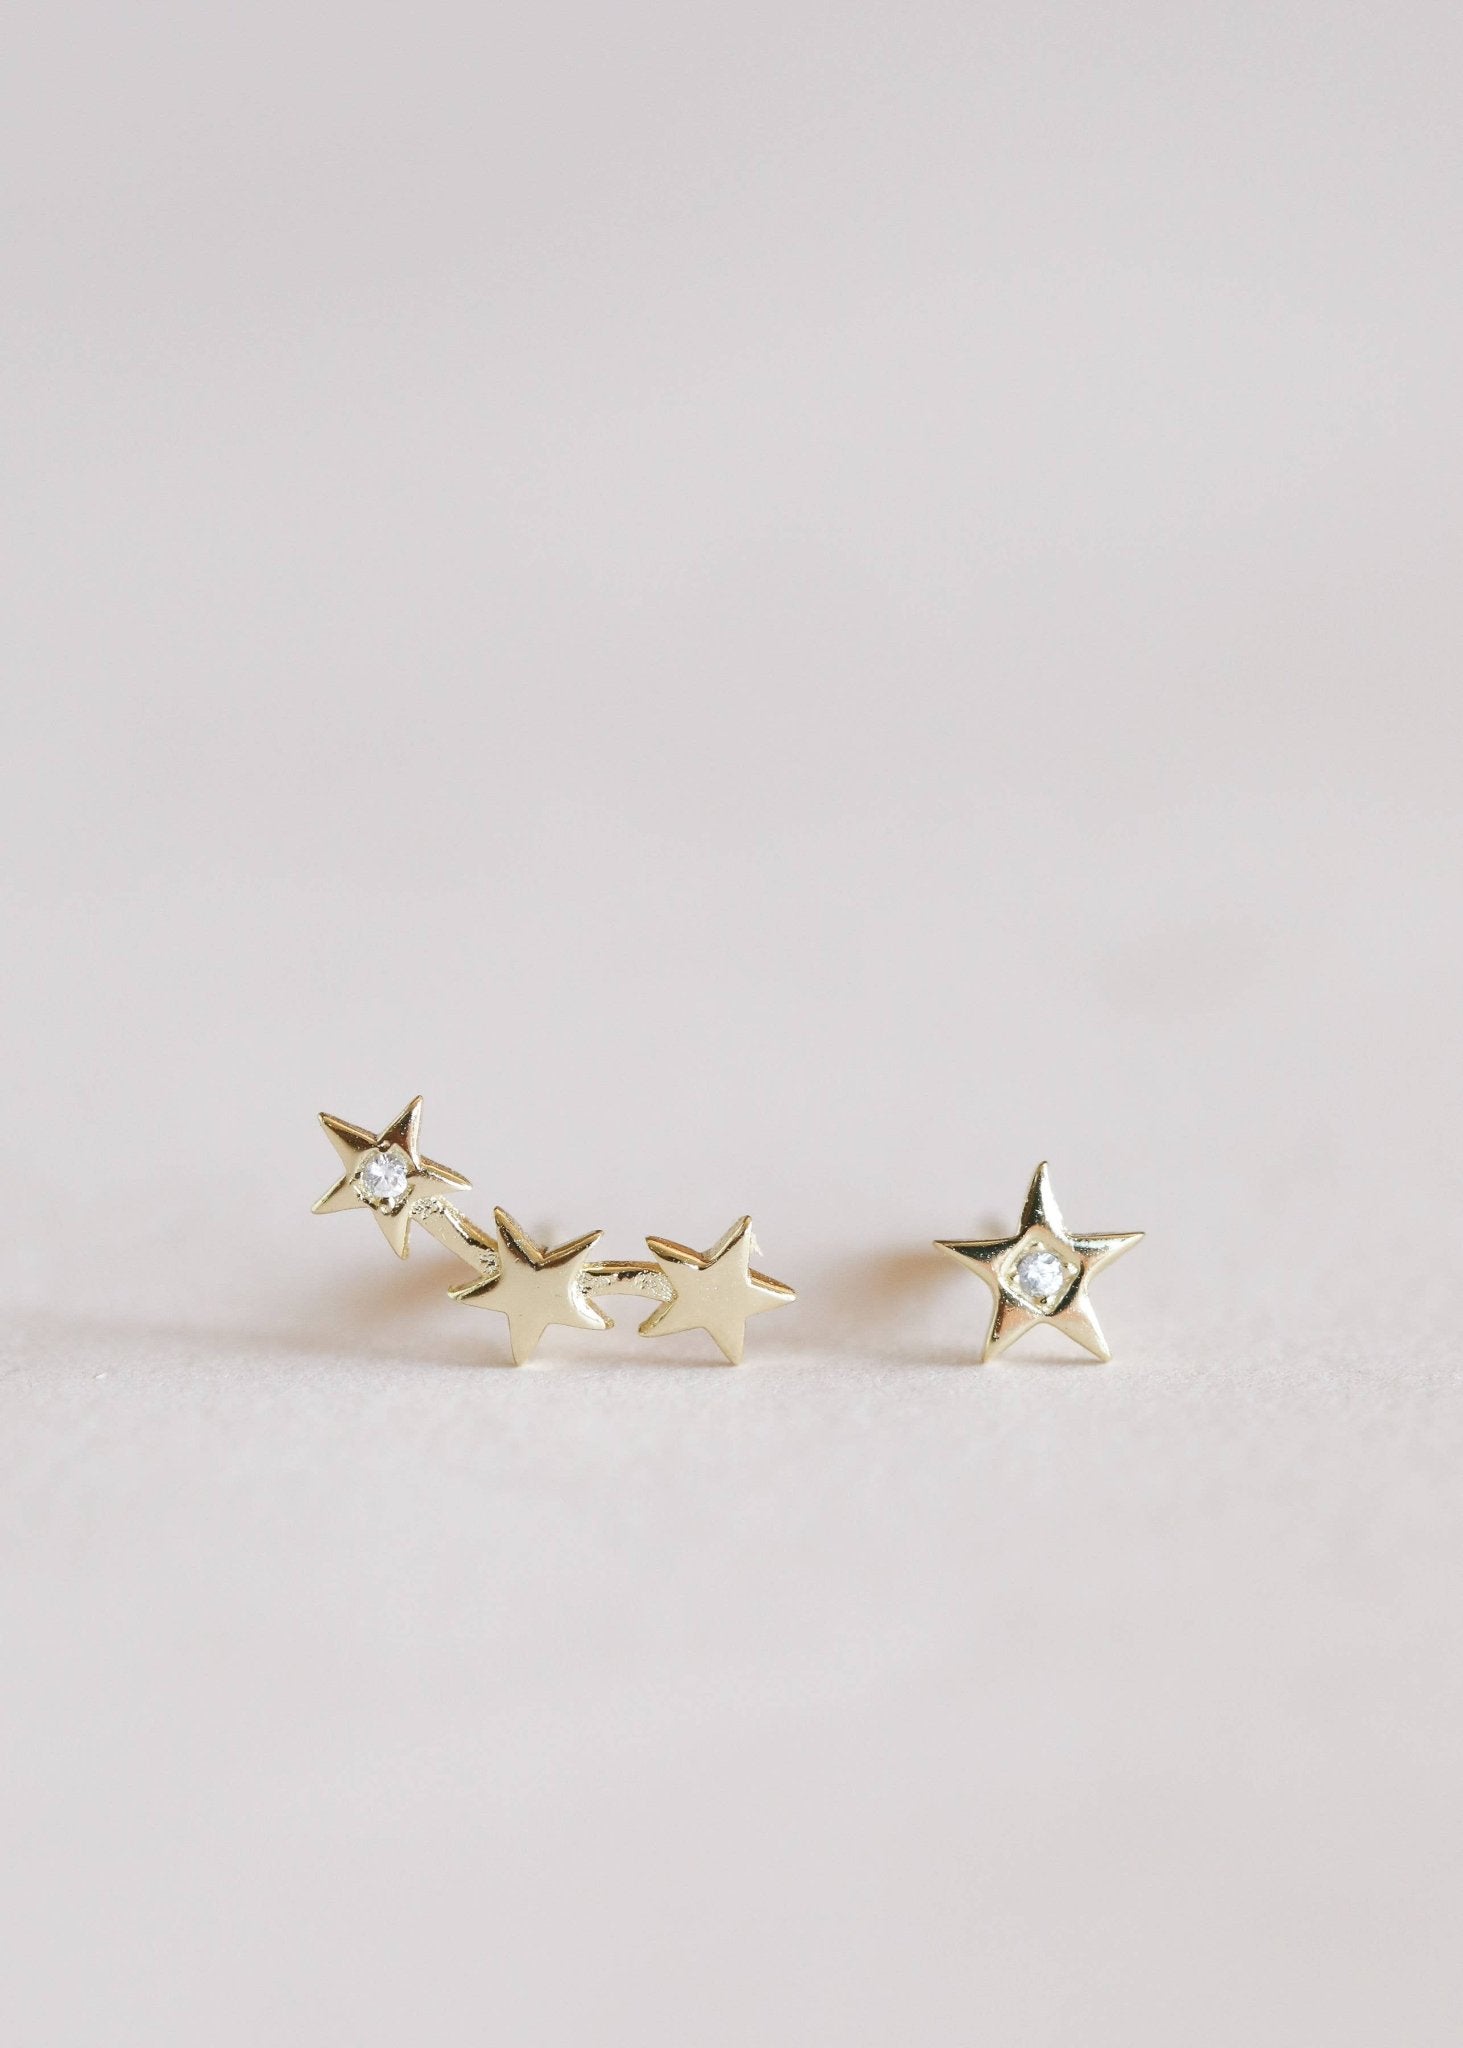 Star Constellation Earrings - Spiral Circle